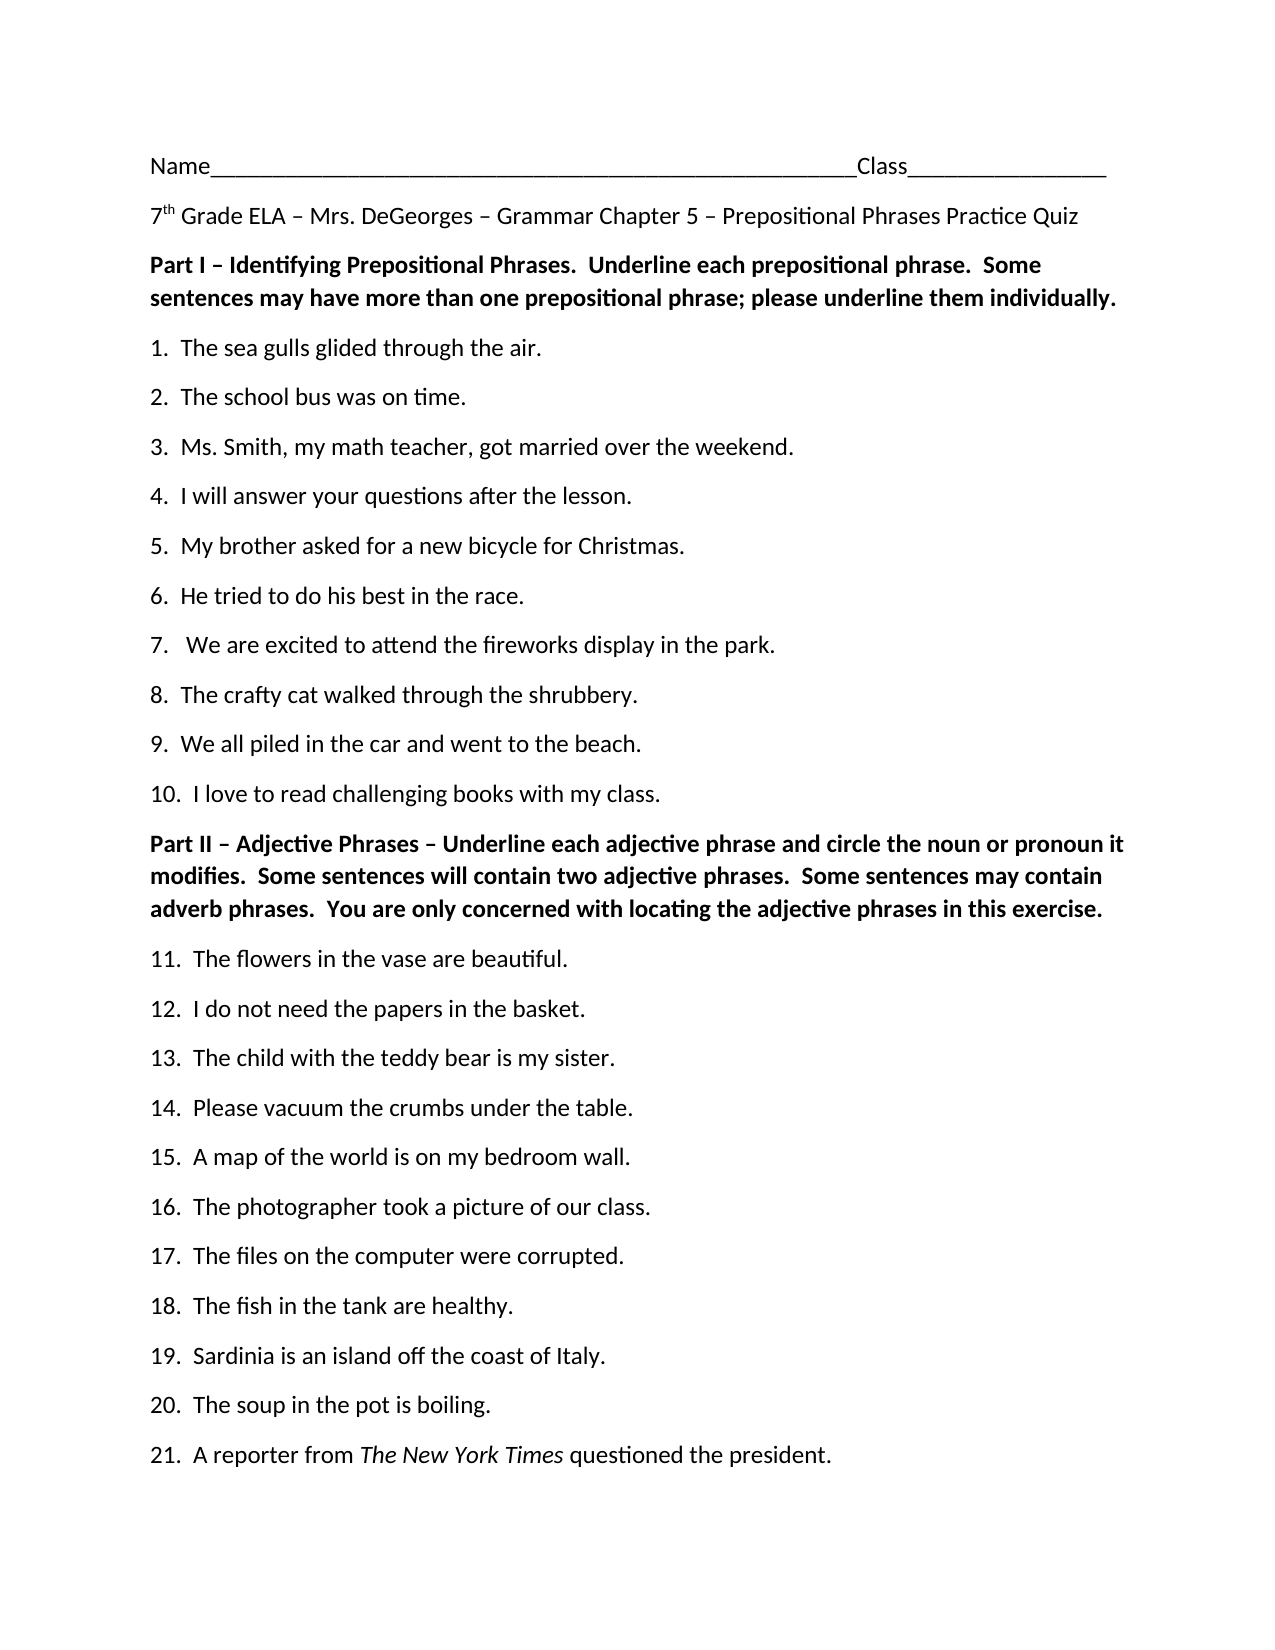 Identifying Prepositions And Prepositional Phrases Worksheet 7